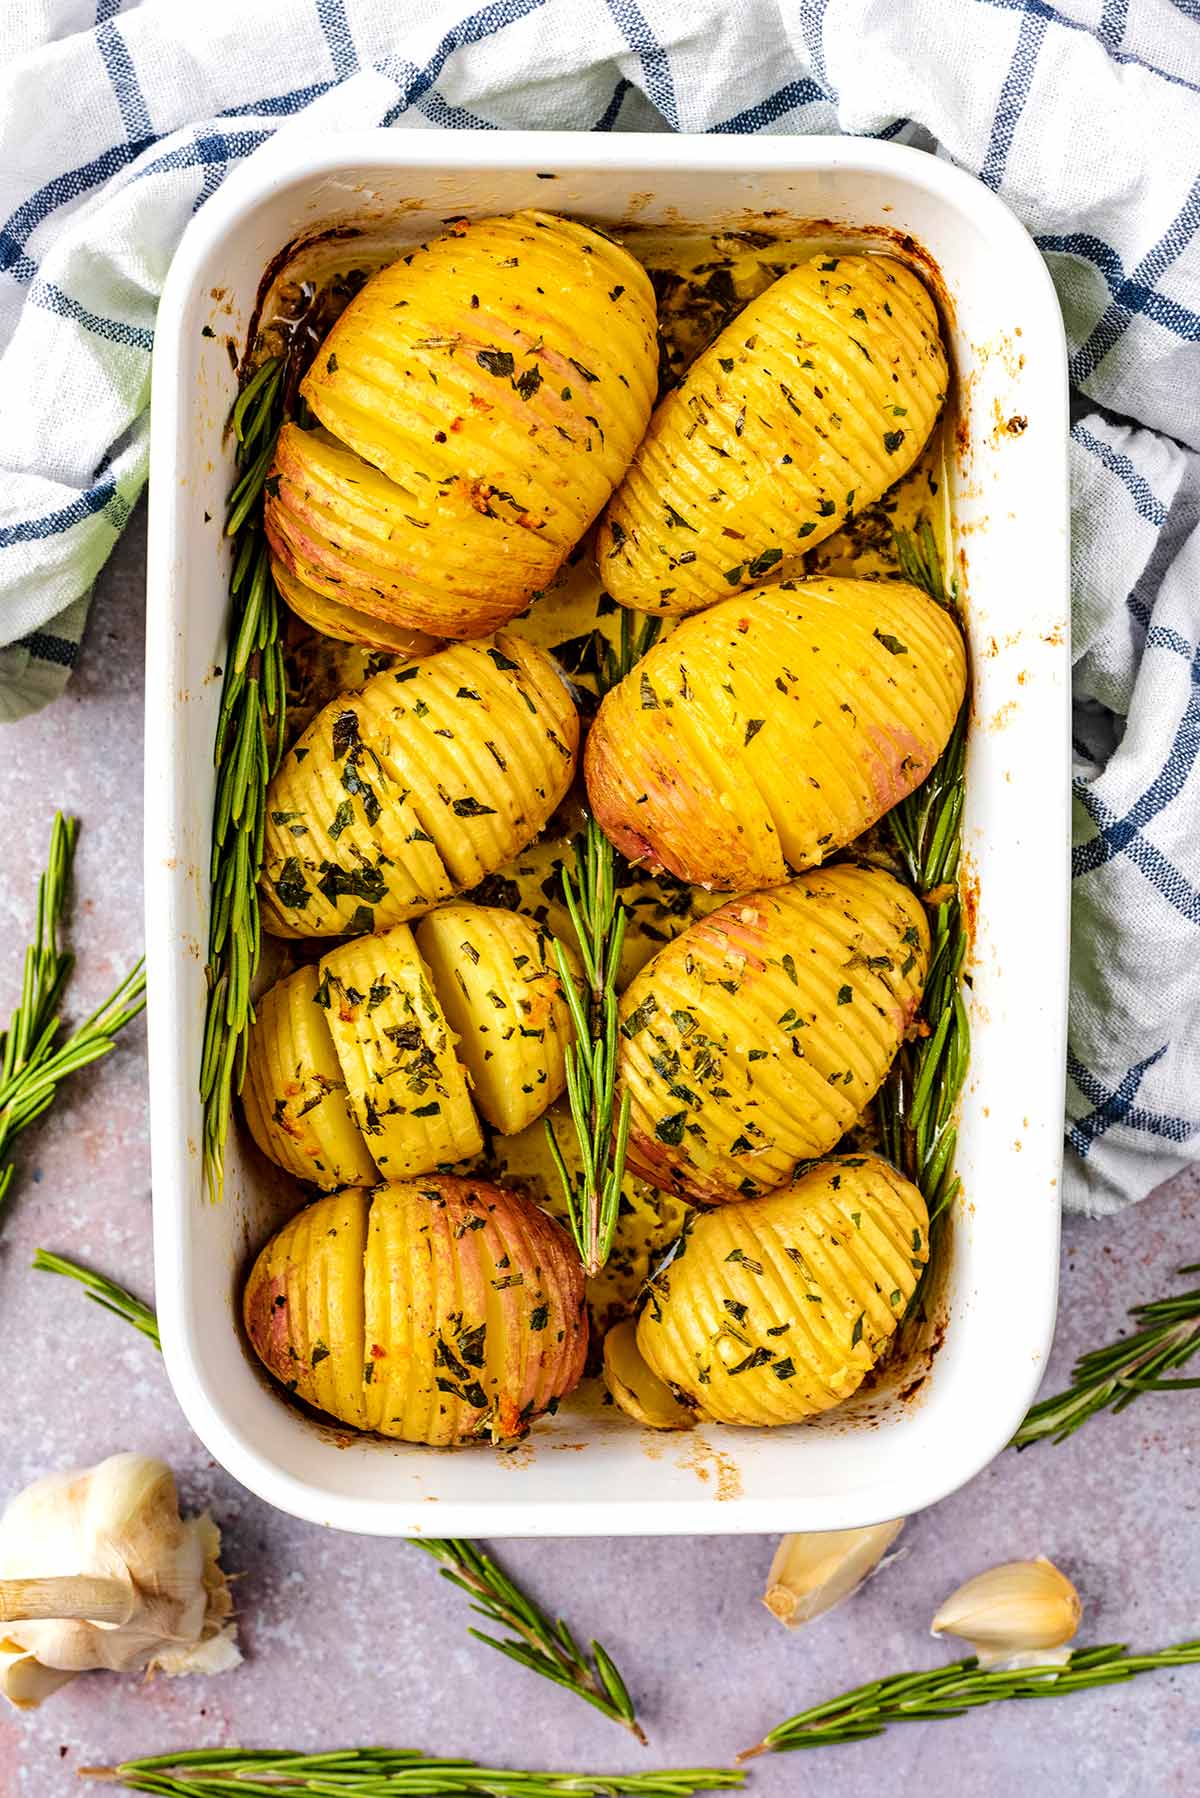 A baking dish containing eight cooked hasselback potatoes.